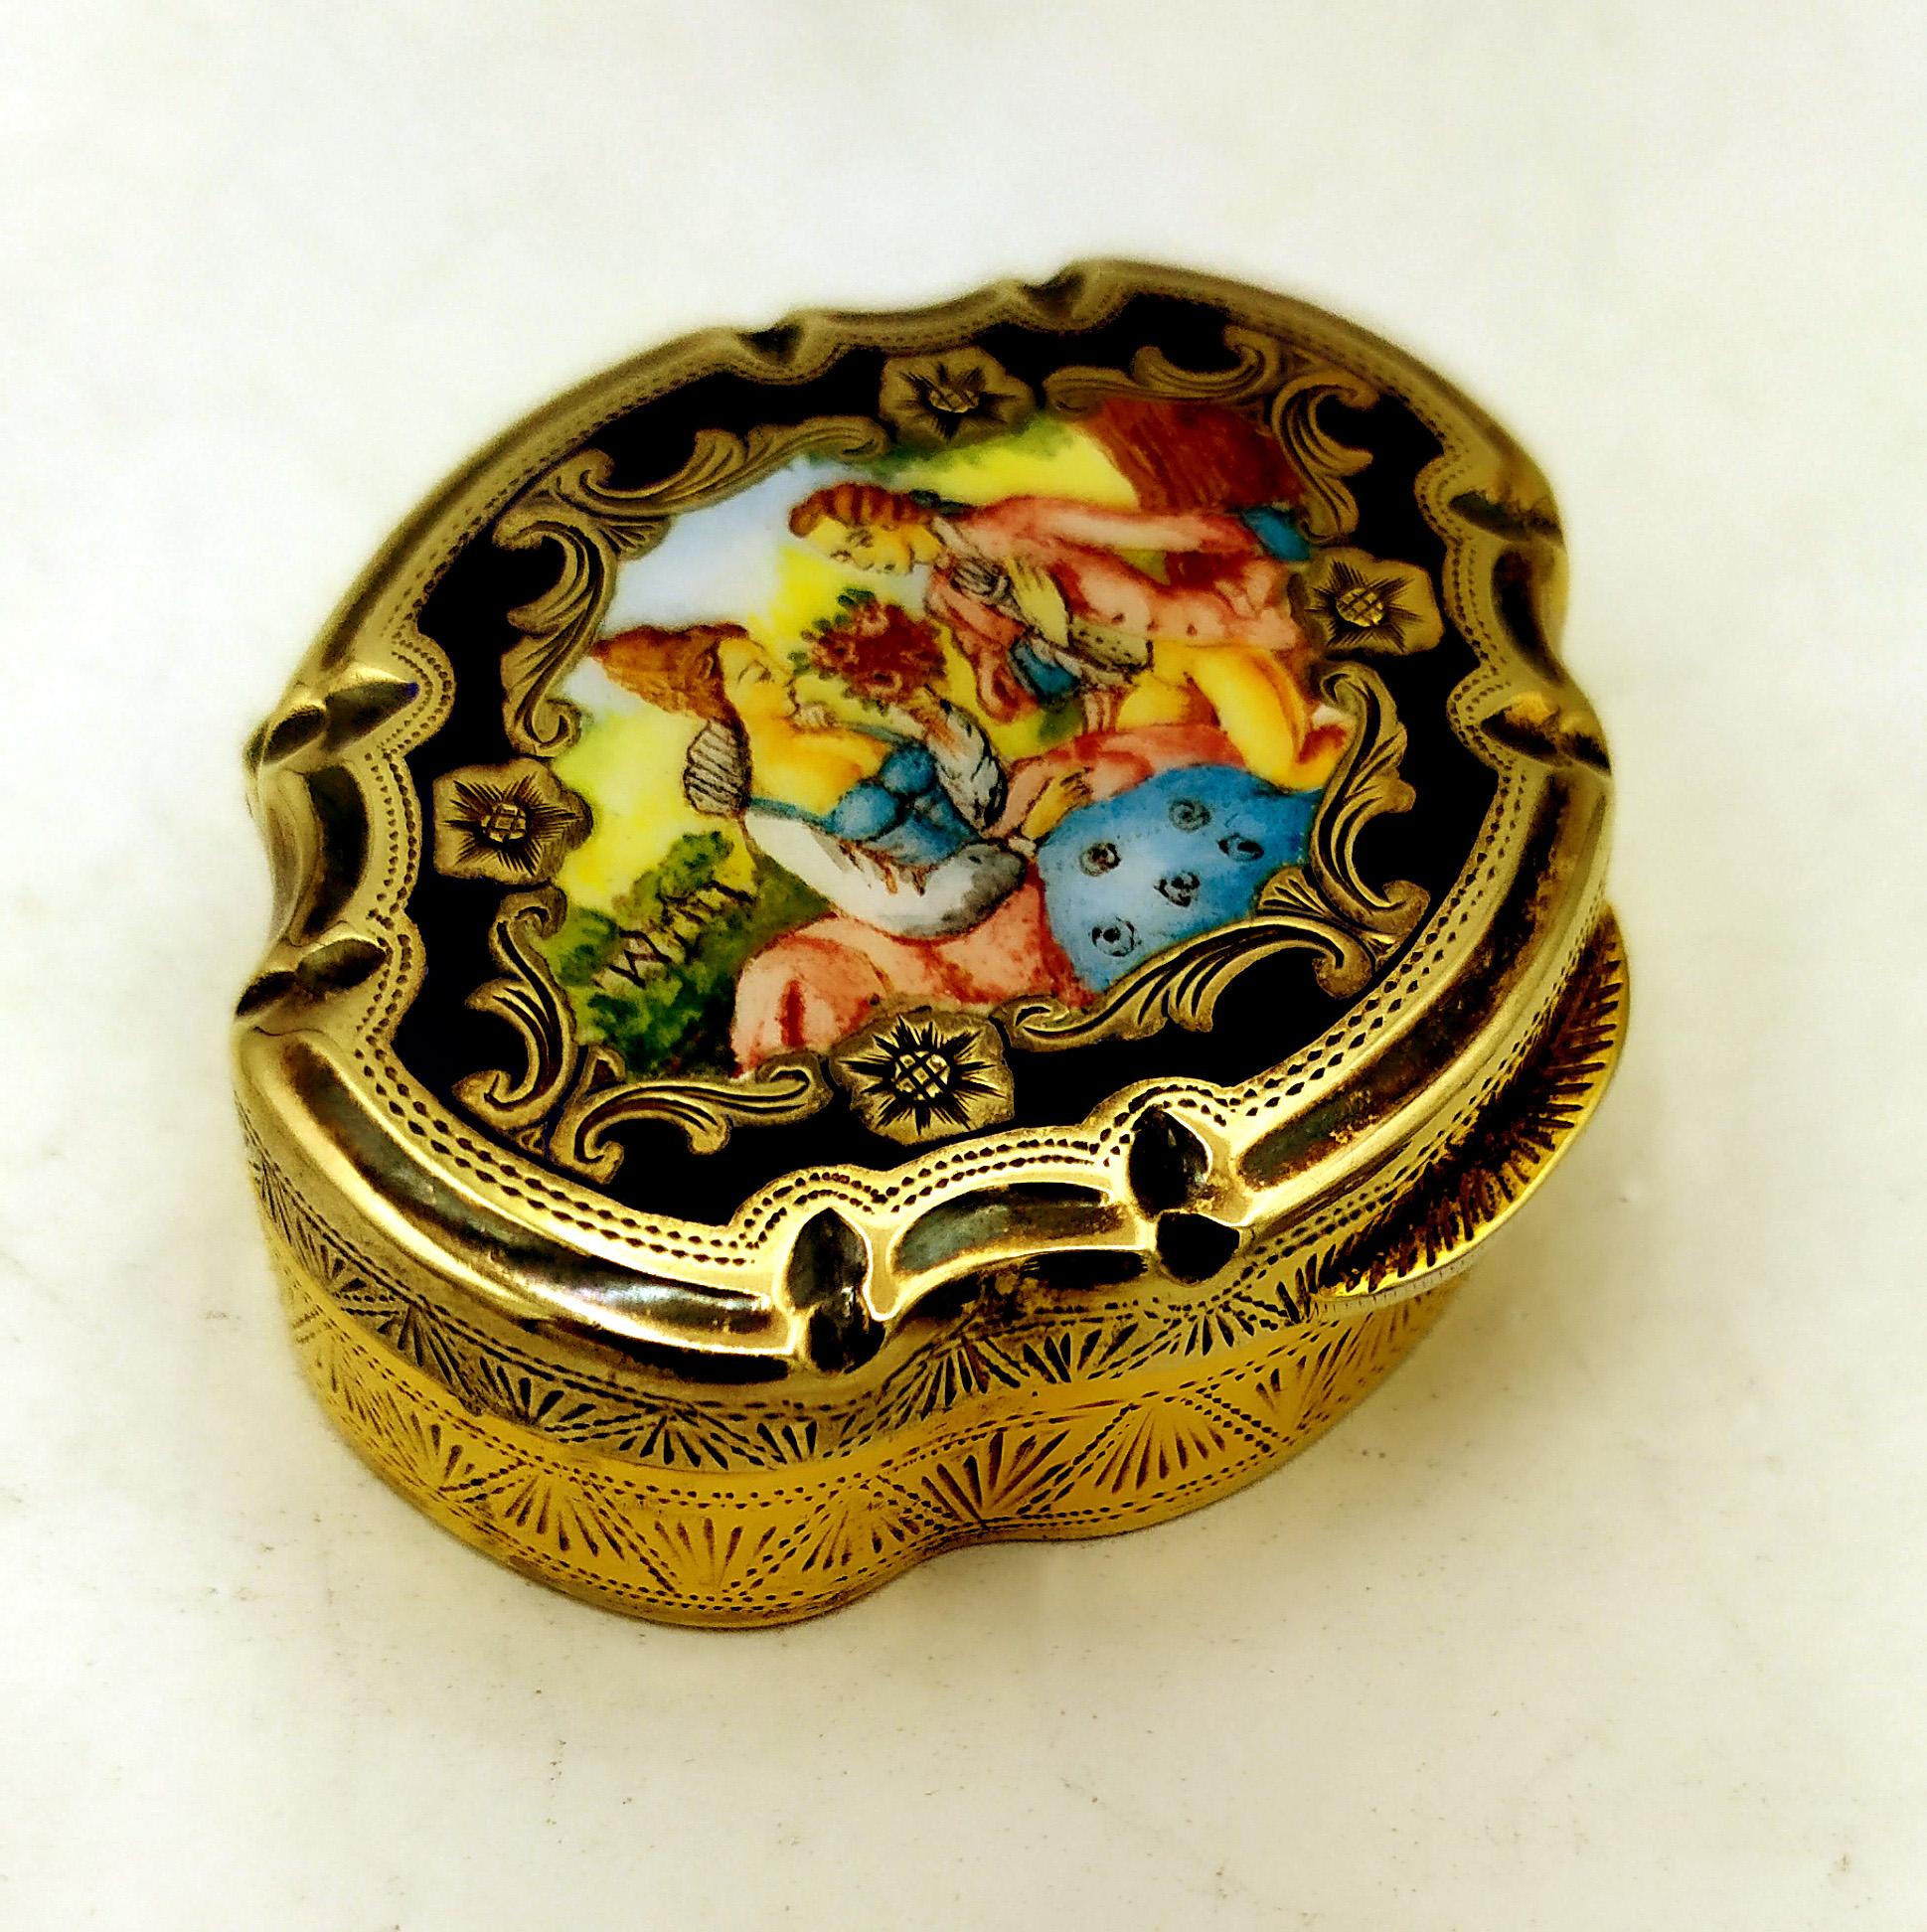 Pill Box Baroque shaped with pastoral miniature Sterling Silver Salimbeni .Baroque shaped pill-box with hand engravings and green fire enamel, with hand painted enameled miniature of pastoral style in the center. Size cm. 4,6 x 5,6 x 1,6. Weight gr.